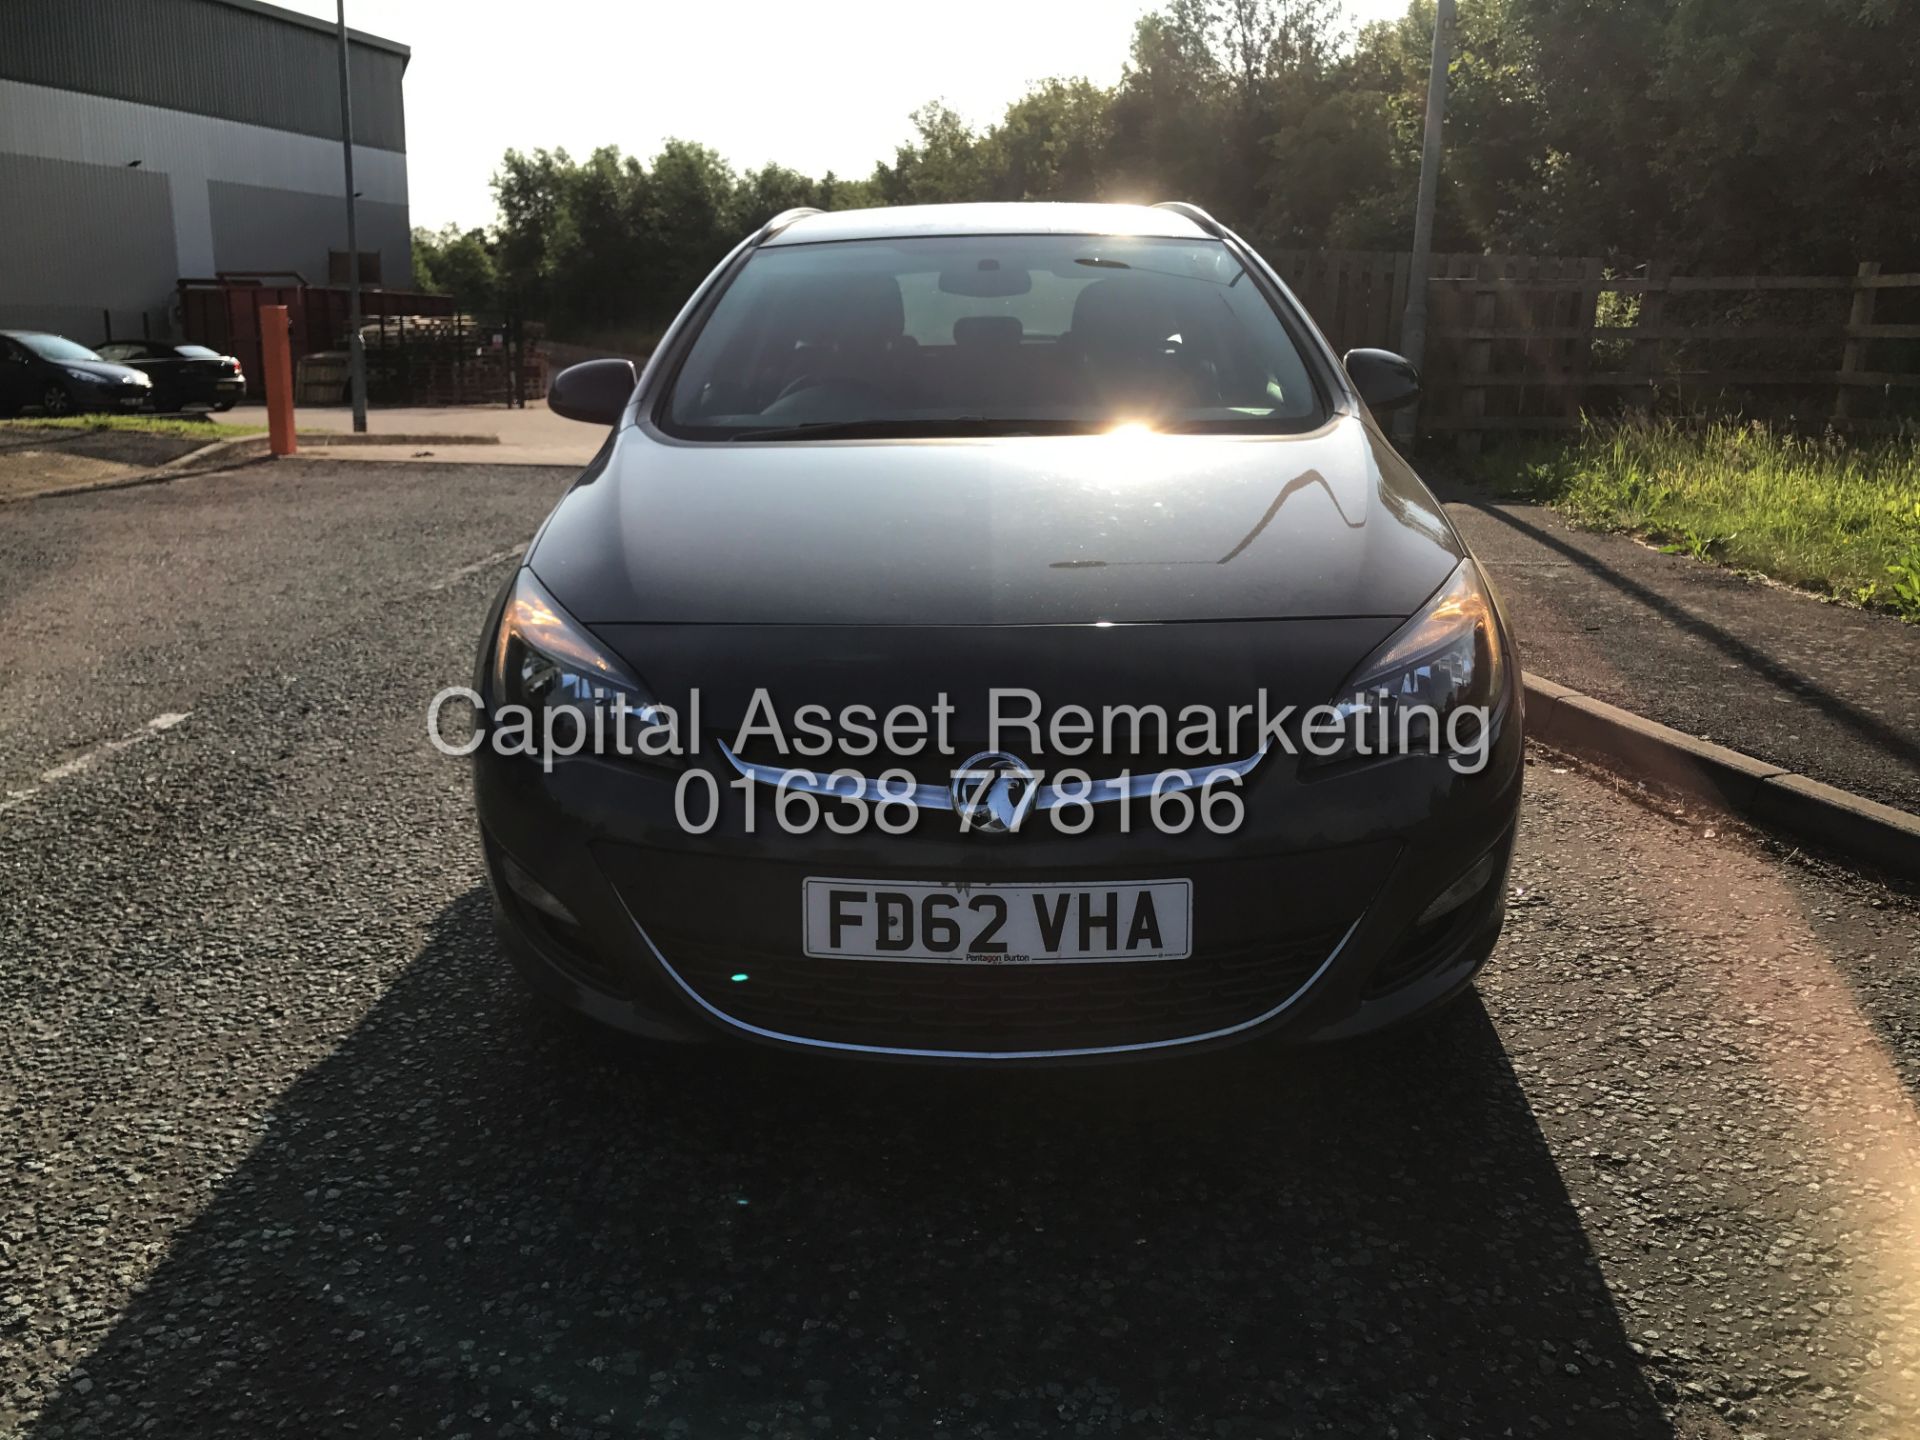 On Sale VAUXHALL ASTRA 1.3CDTI "TECH LINE" ESTATE (2013 MODEL) 1 OWNER WITH HISTORY SAT NAV AIR CON - Image 3 of 20